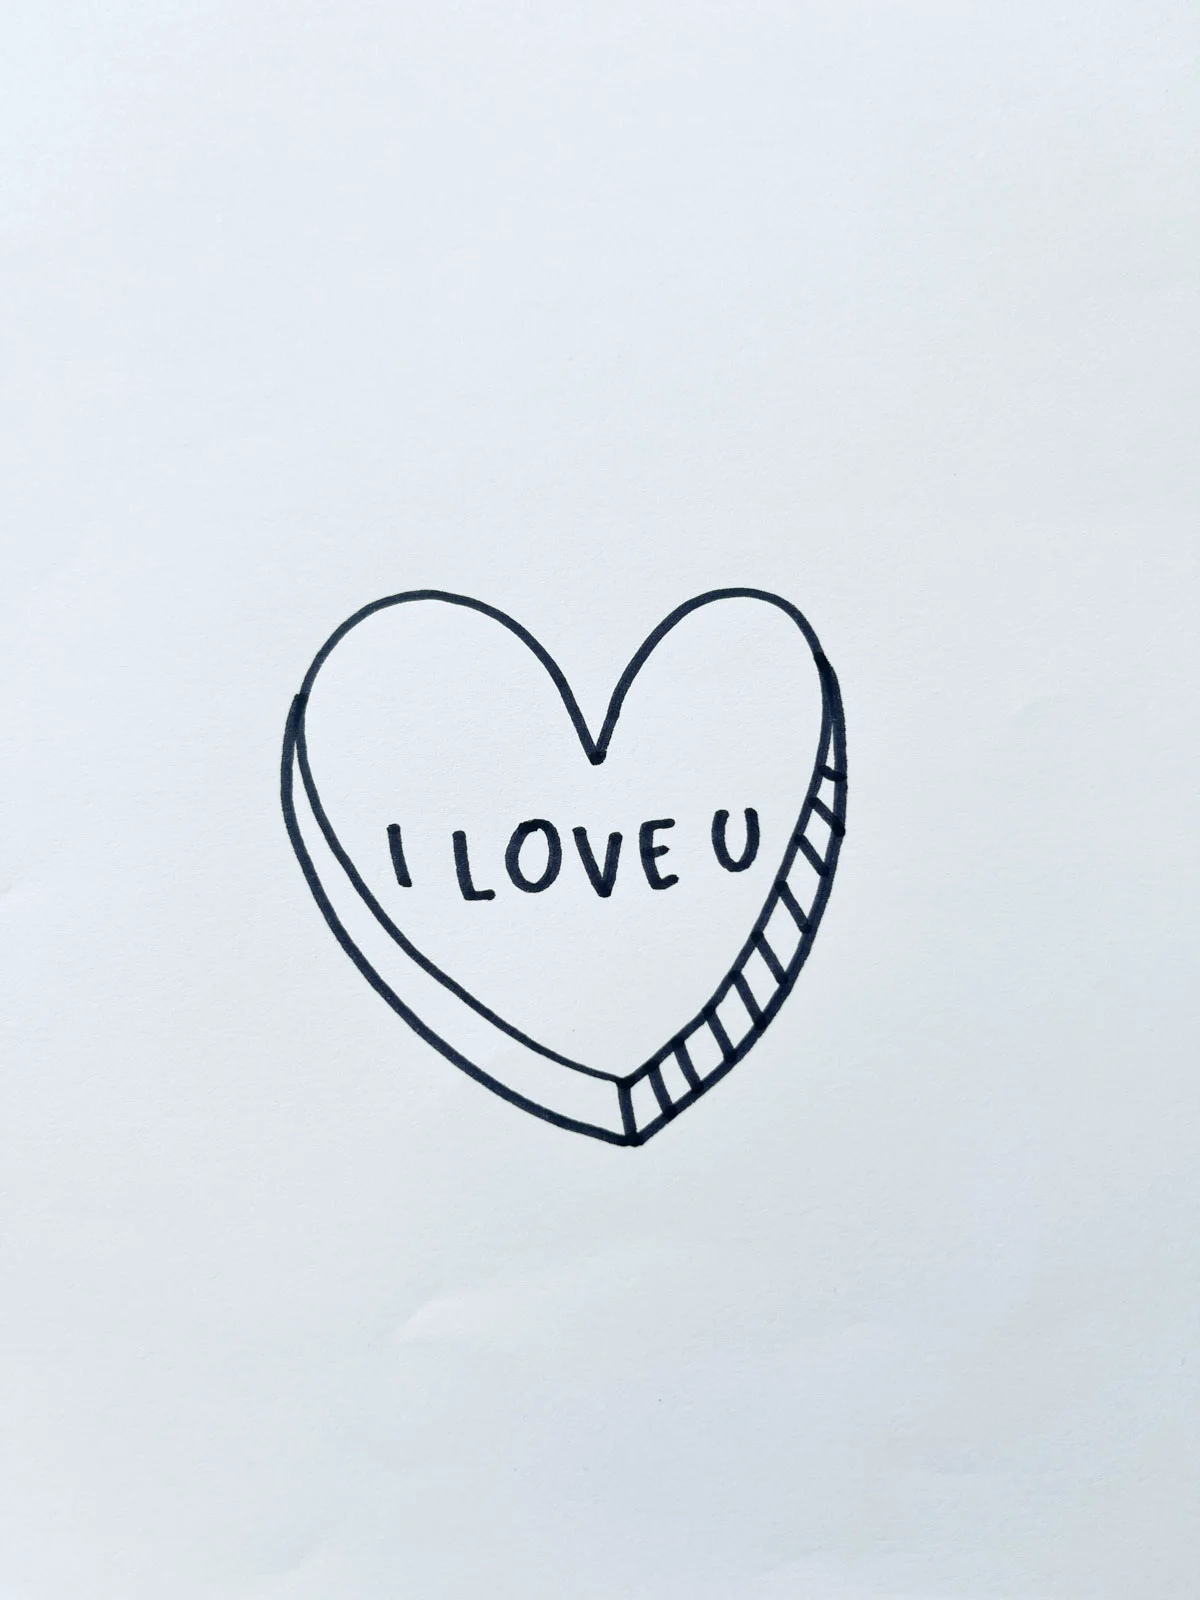 i love you heart drawing